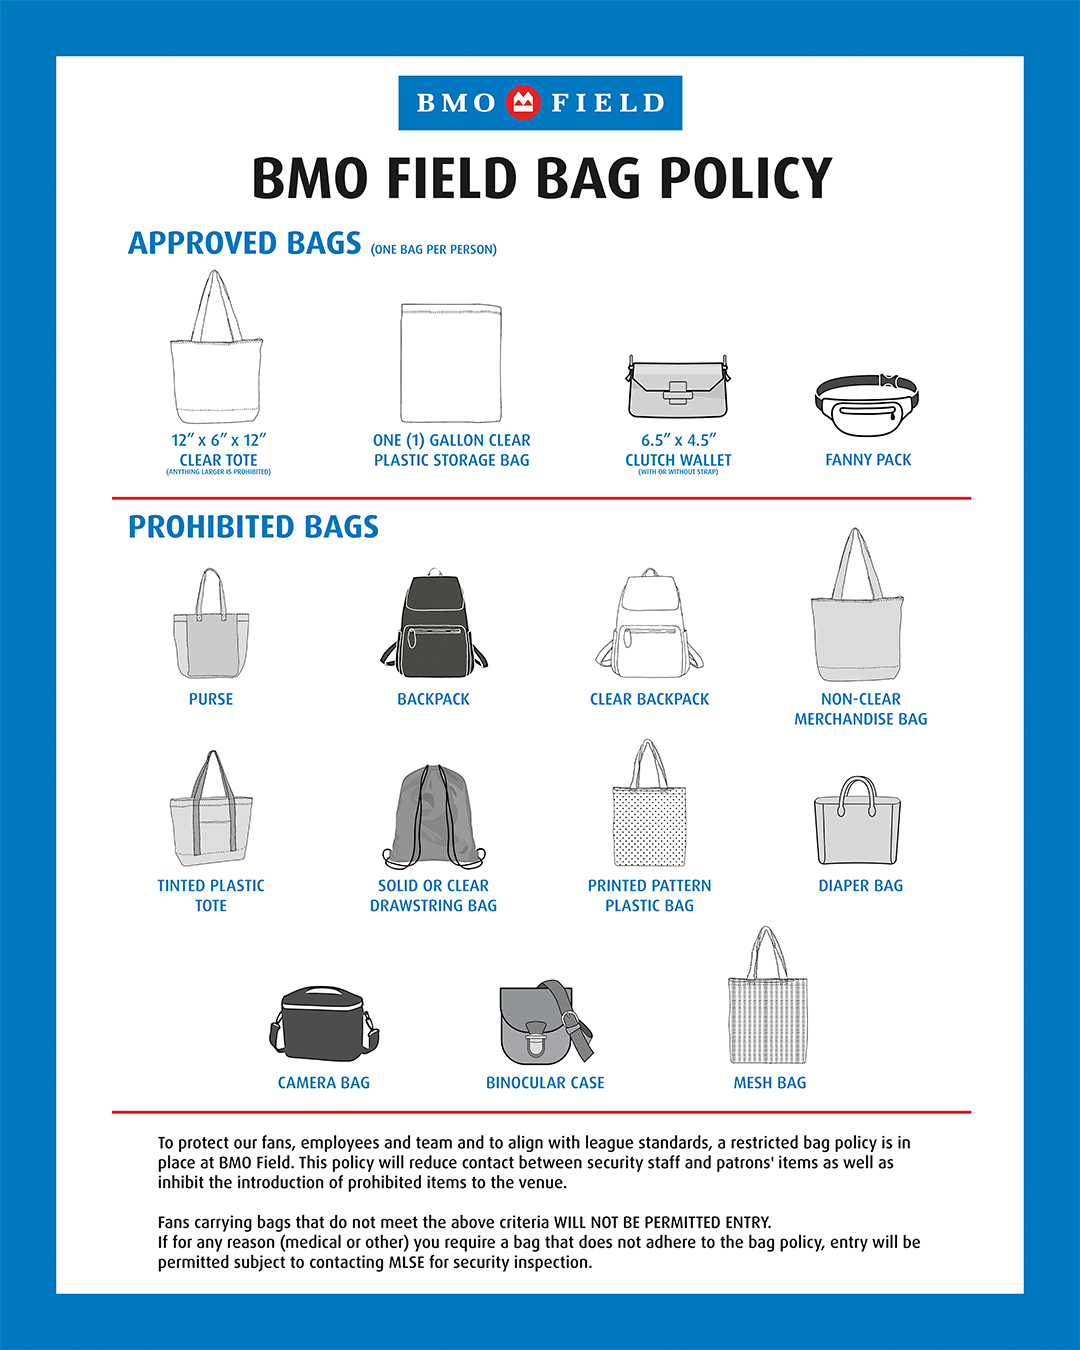 The Official, straight from MLSE, BMO Field bag policy and a few